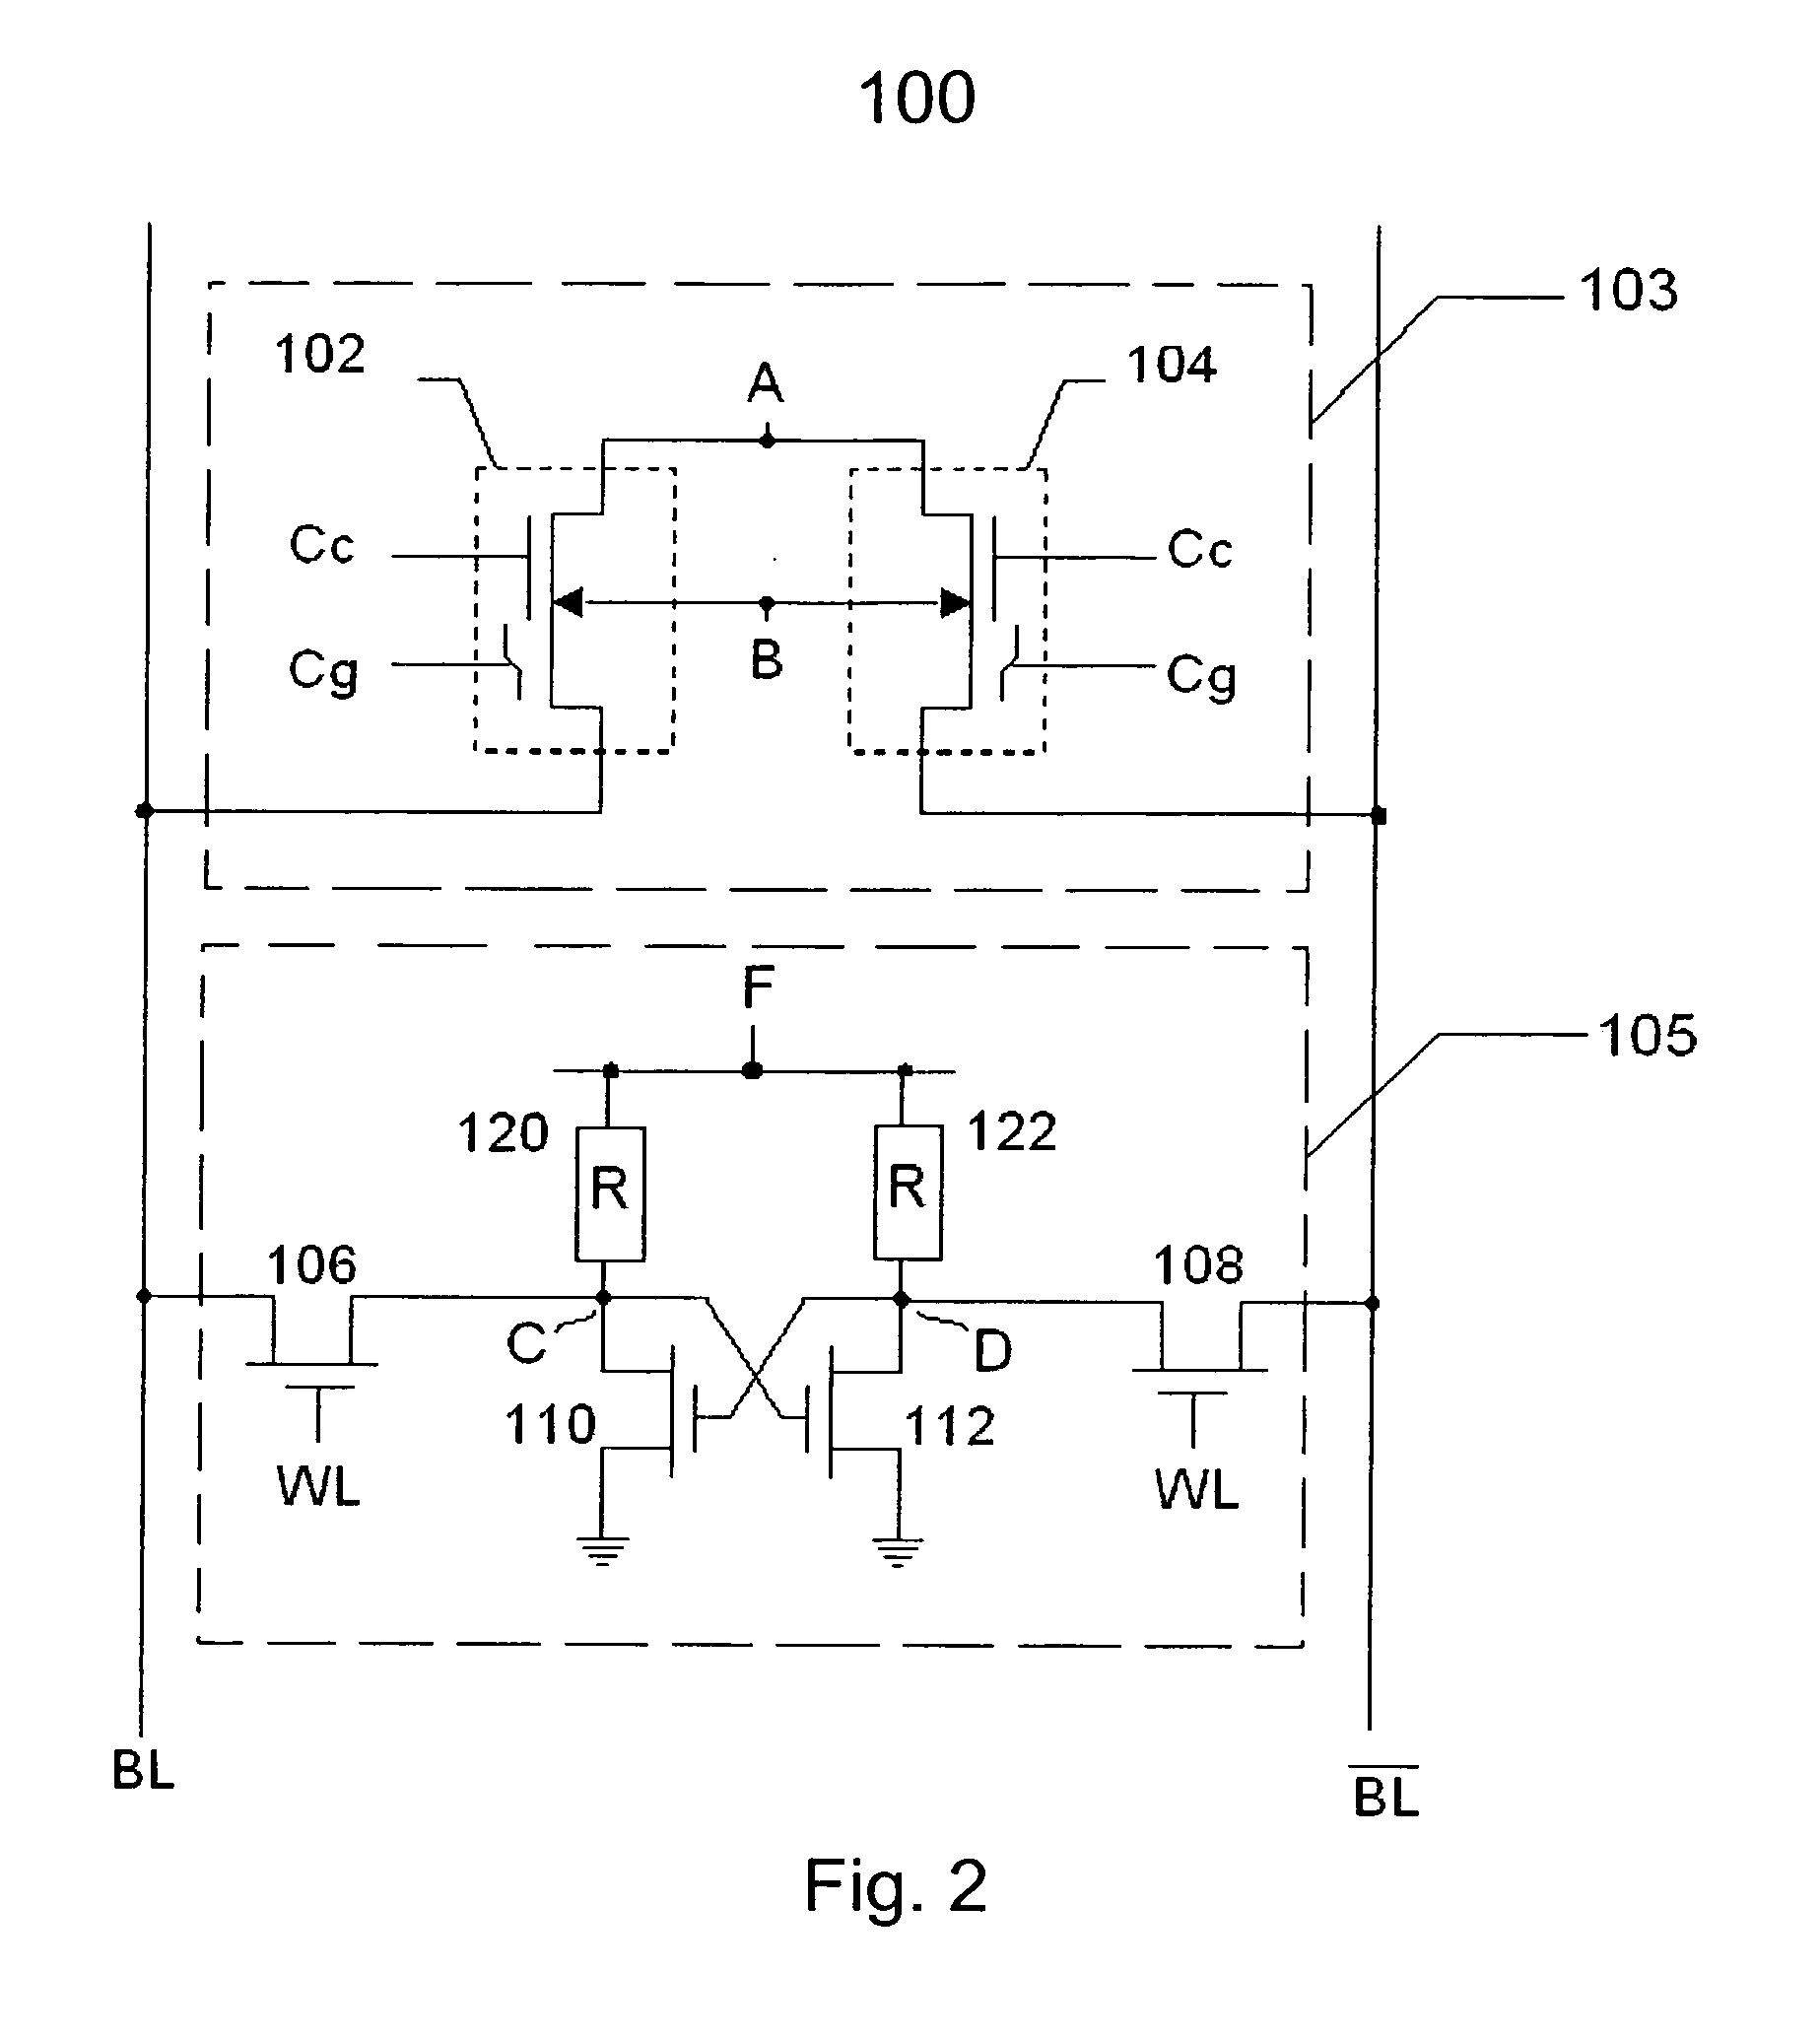 Non-volatile and static random access memory cells sharing the same bitlines